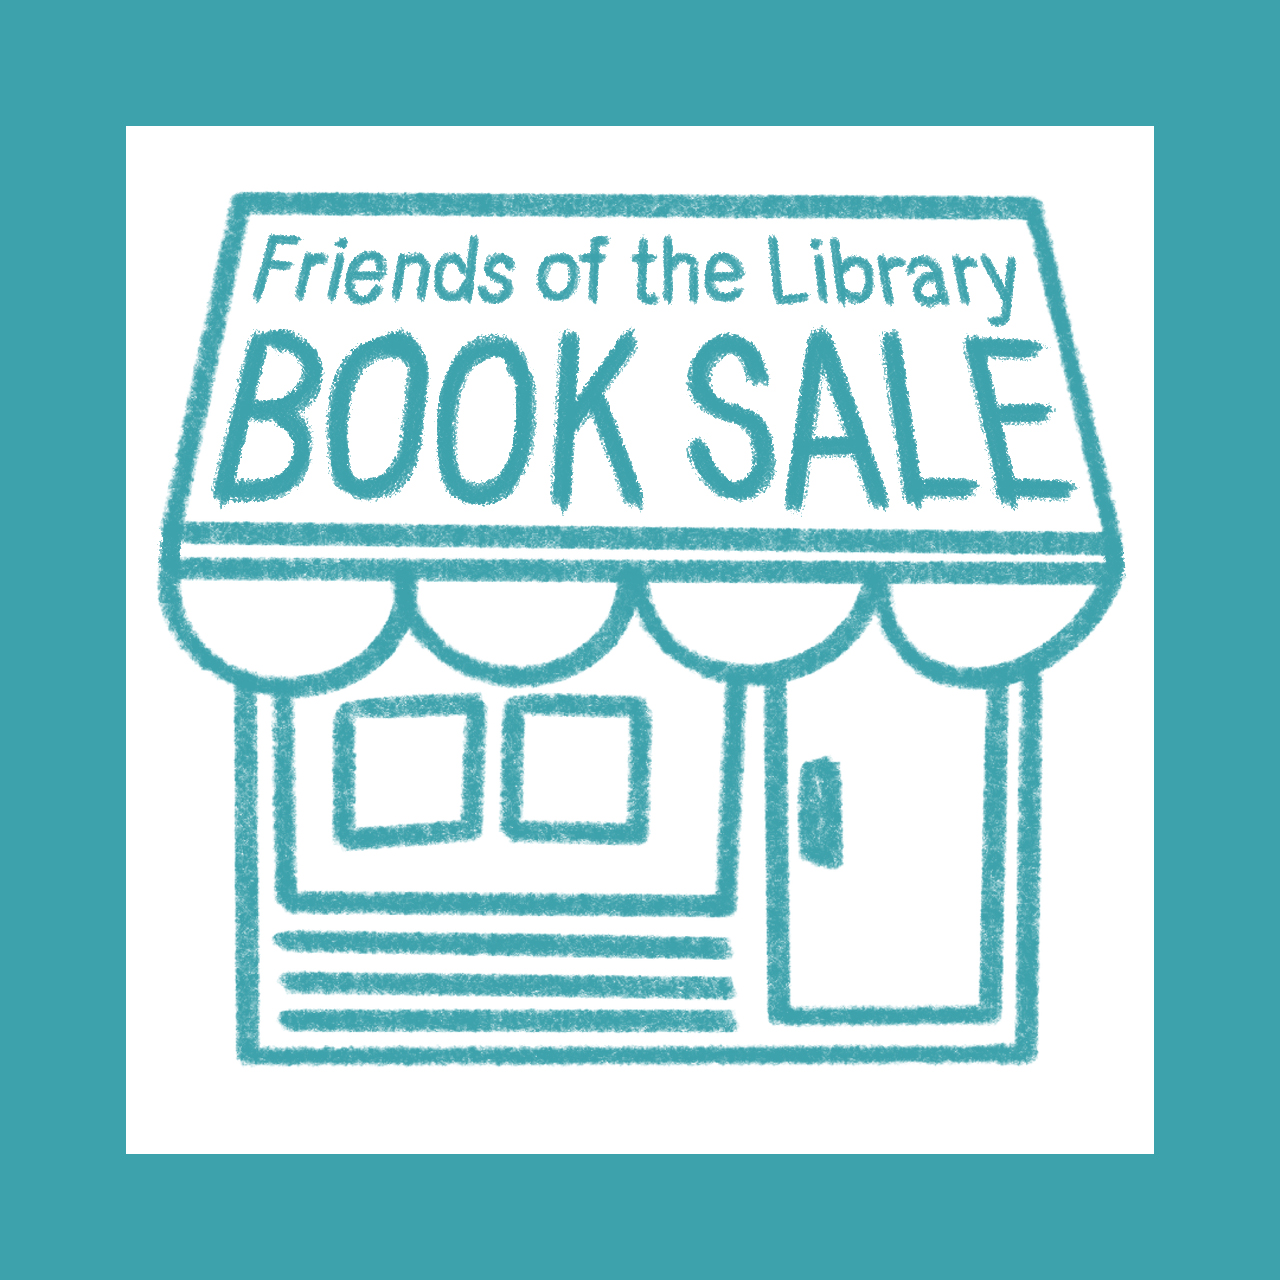 A crayon drawing, in teal, of a shop front whose awning reads "Friends of the Library book sale."